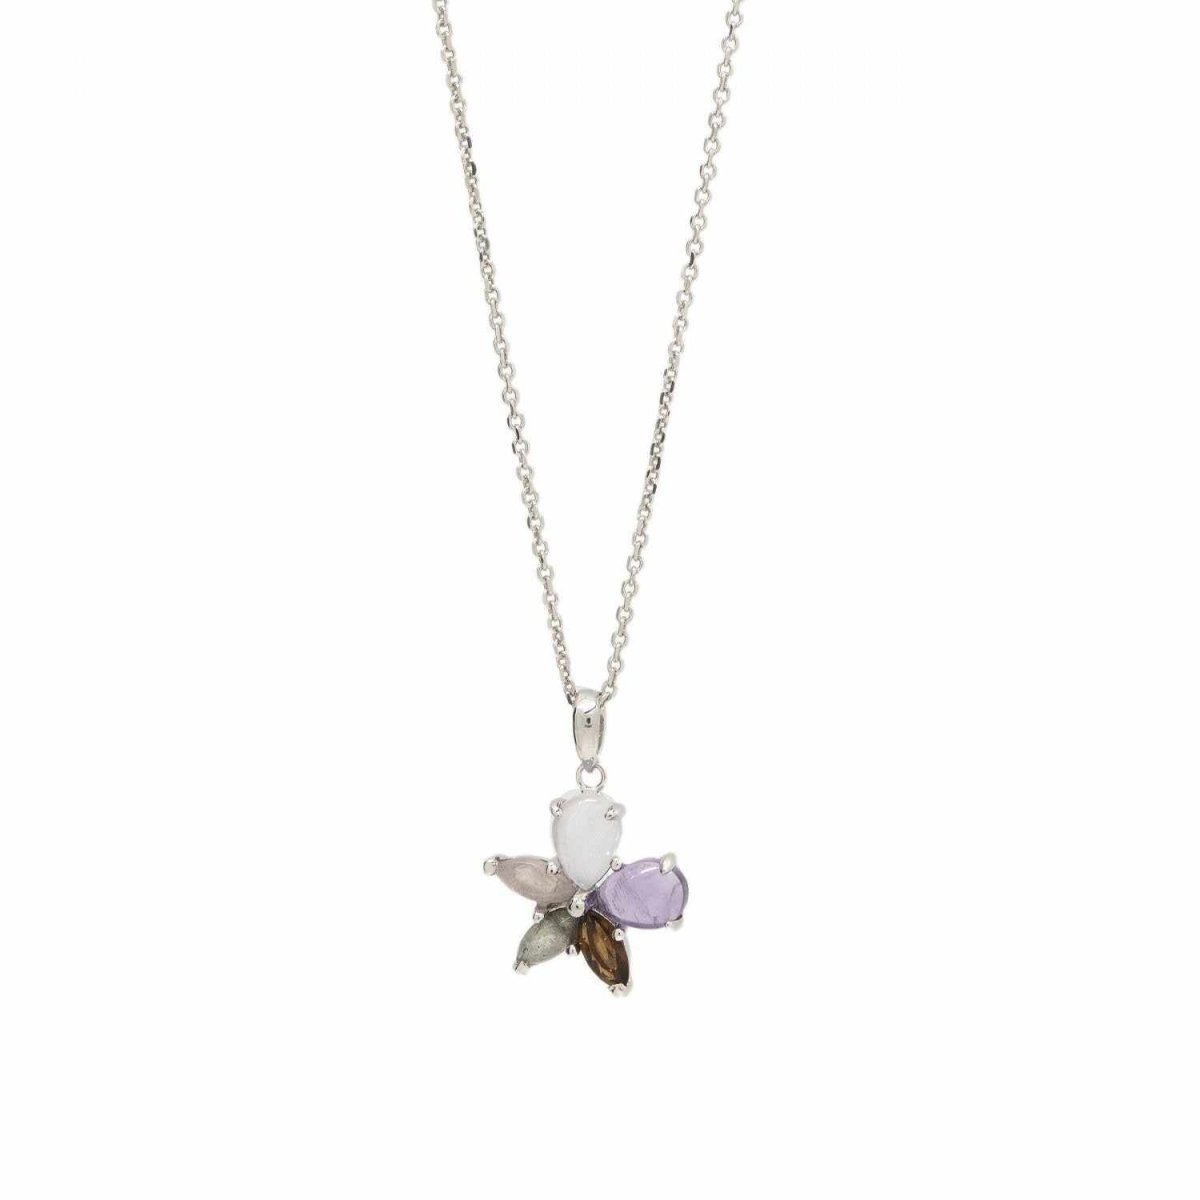 Necklace - Necklaces with stones in silver with floral design in amethyst tone